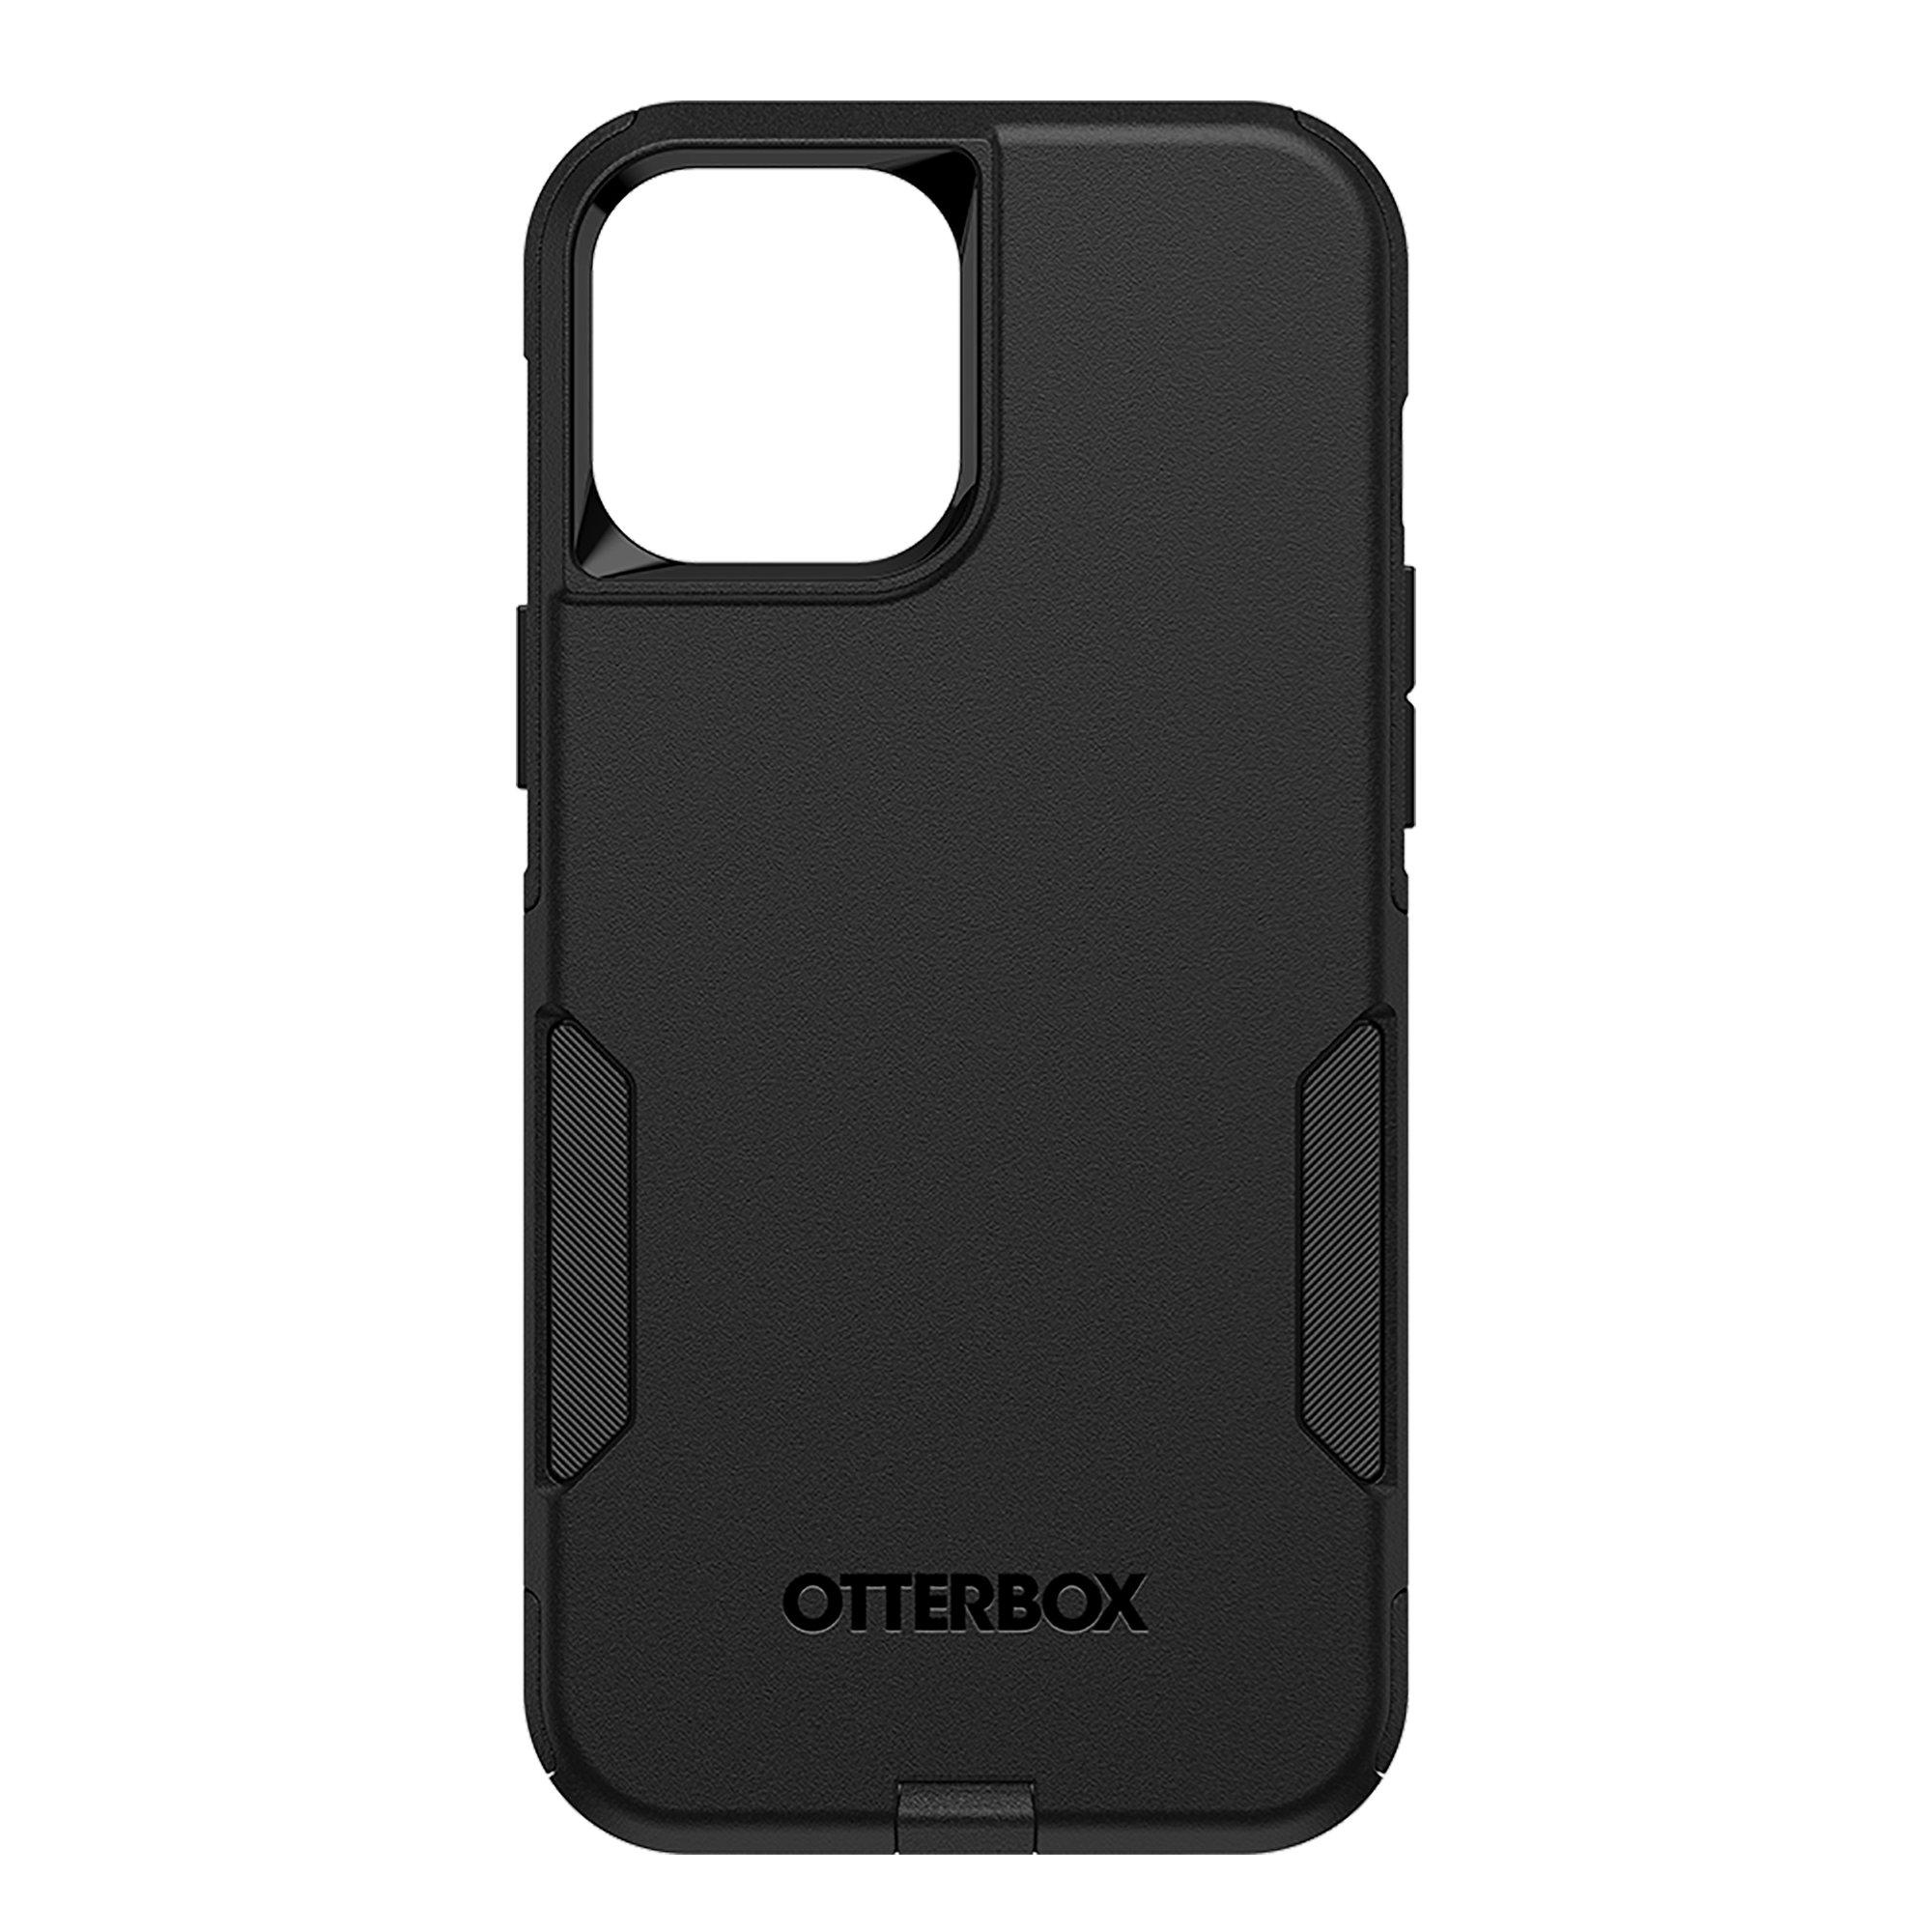 Otterbox Commuter Antimicrobial Case For Iphone 12 Pro Max